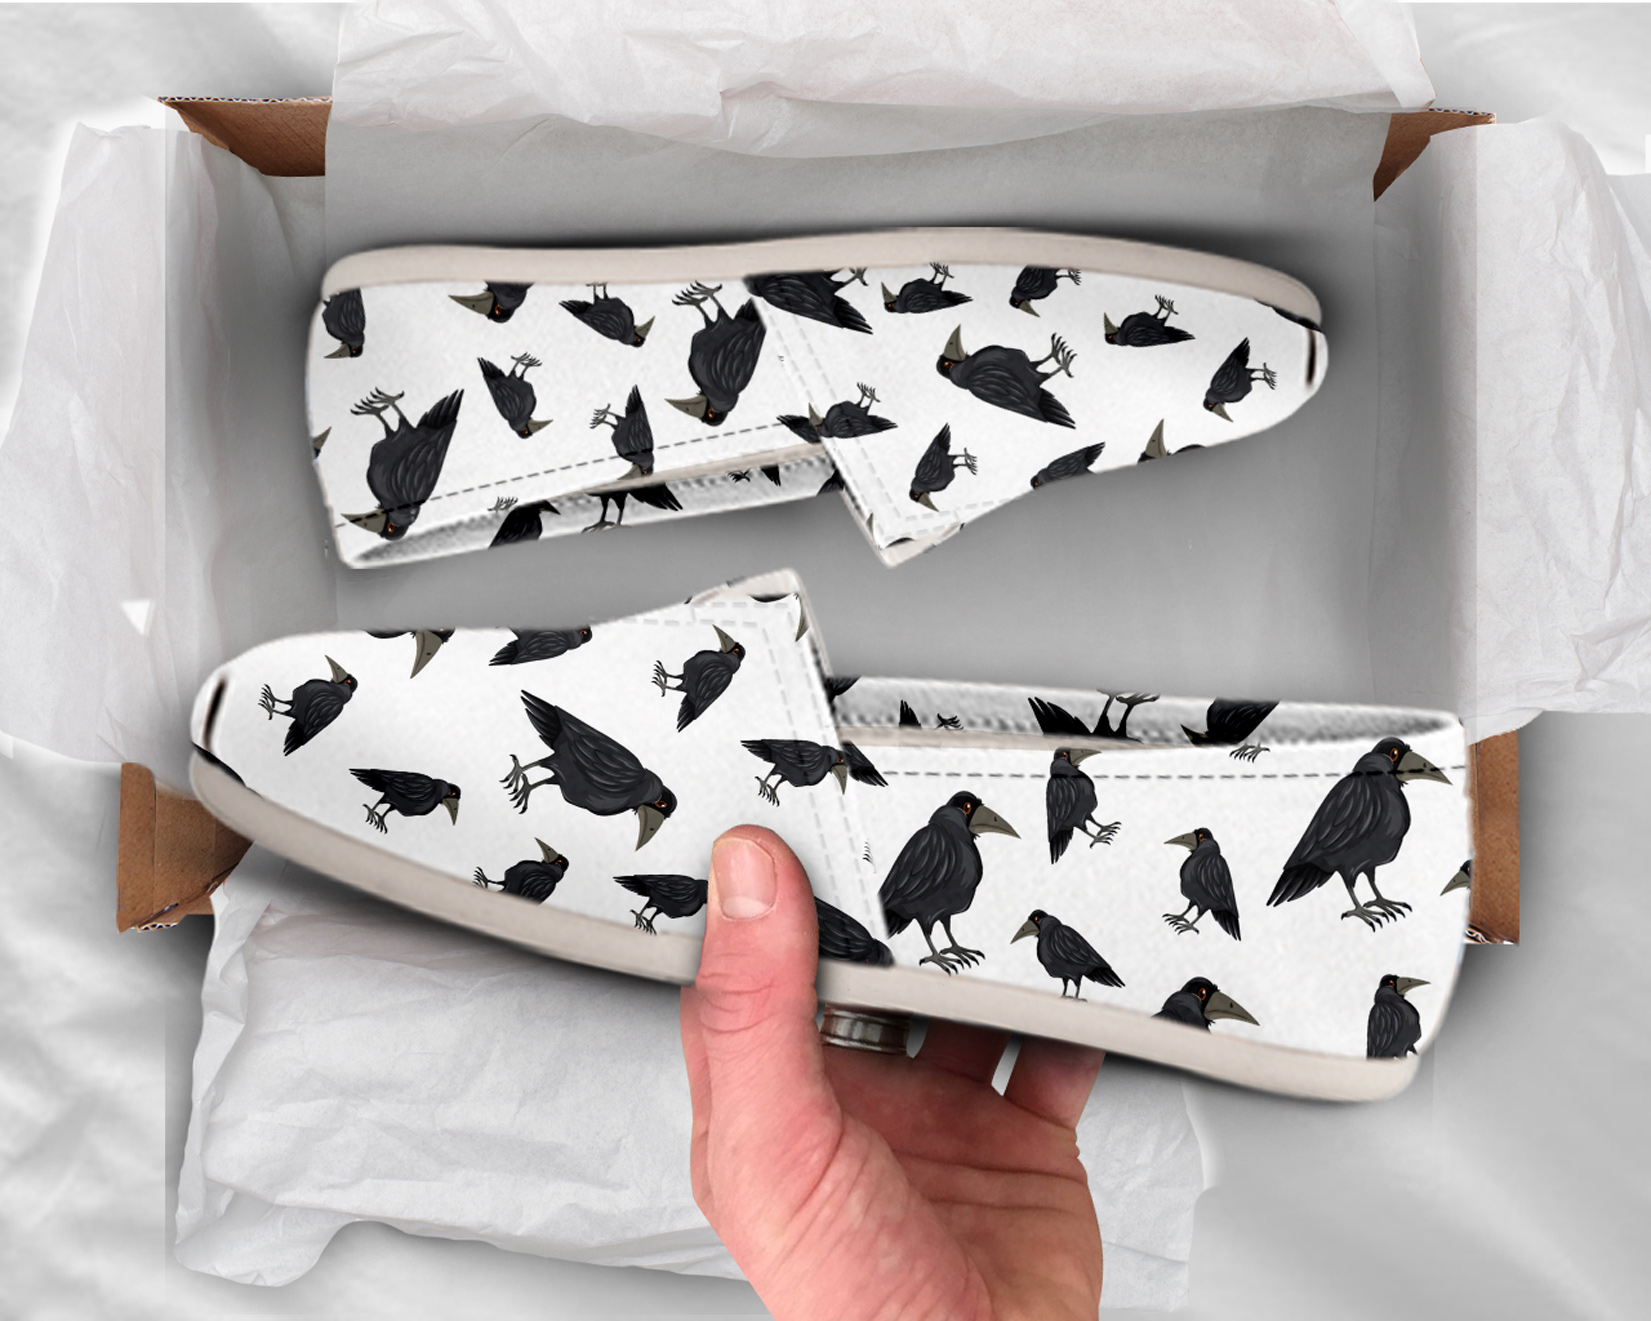 Black Crow Shoes | Custom Canvas Sneakers For Kids & Adults